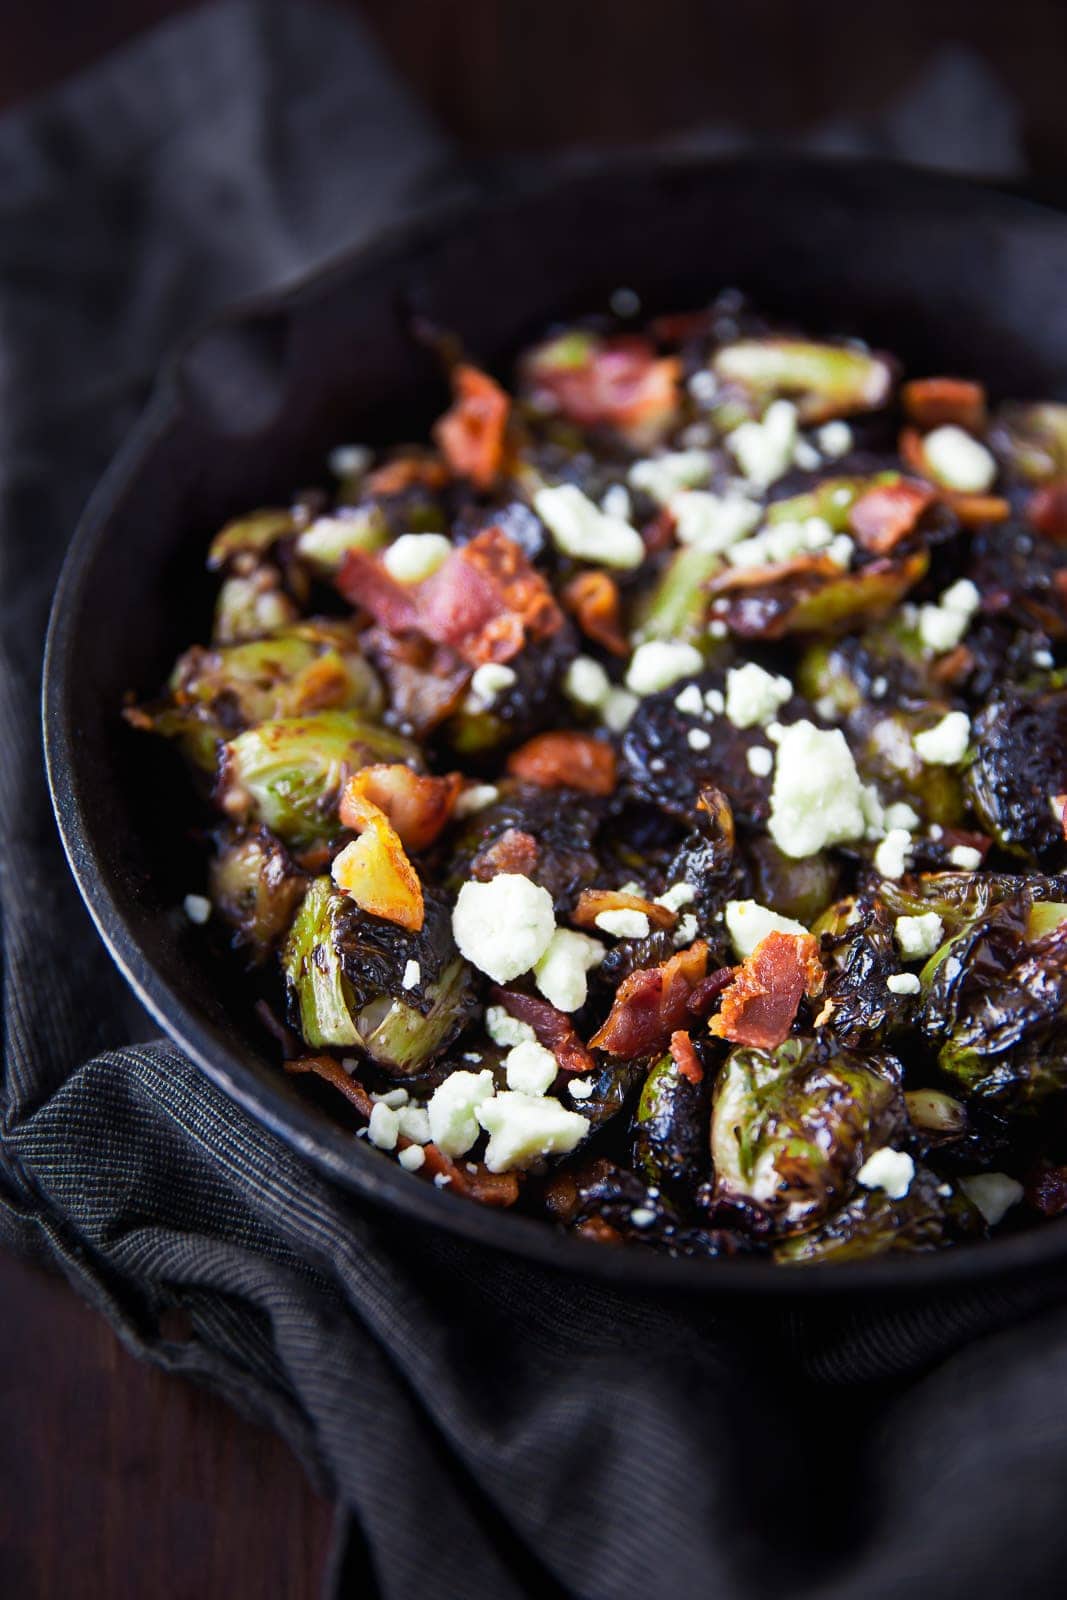 Oven roasted brussels sprouts with a blueberry balsamic glaze tossed with bacon and blue cheese makes for a delectable addition to your holiday table!